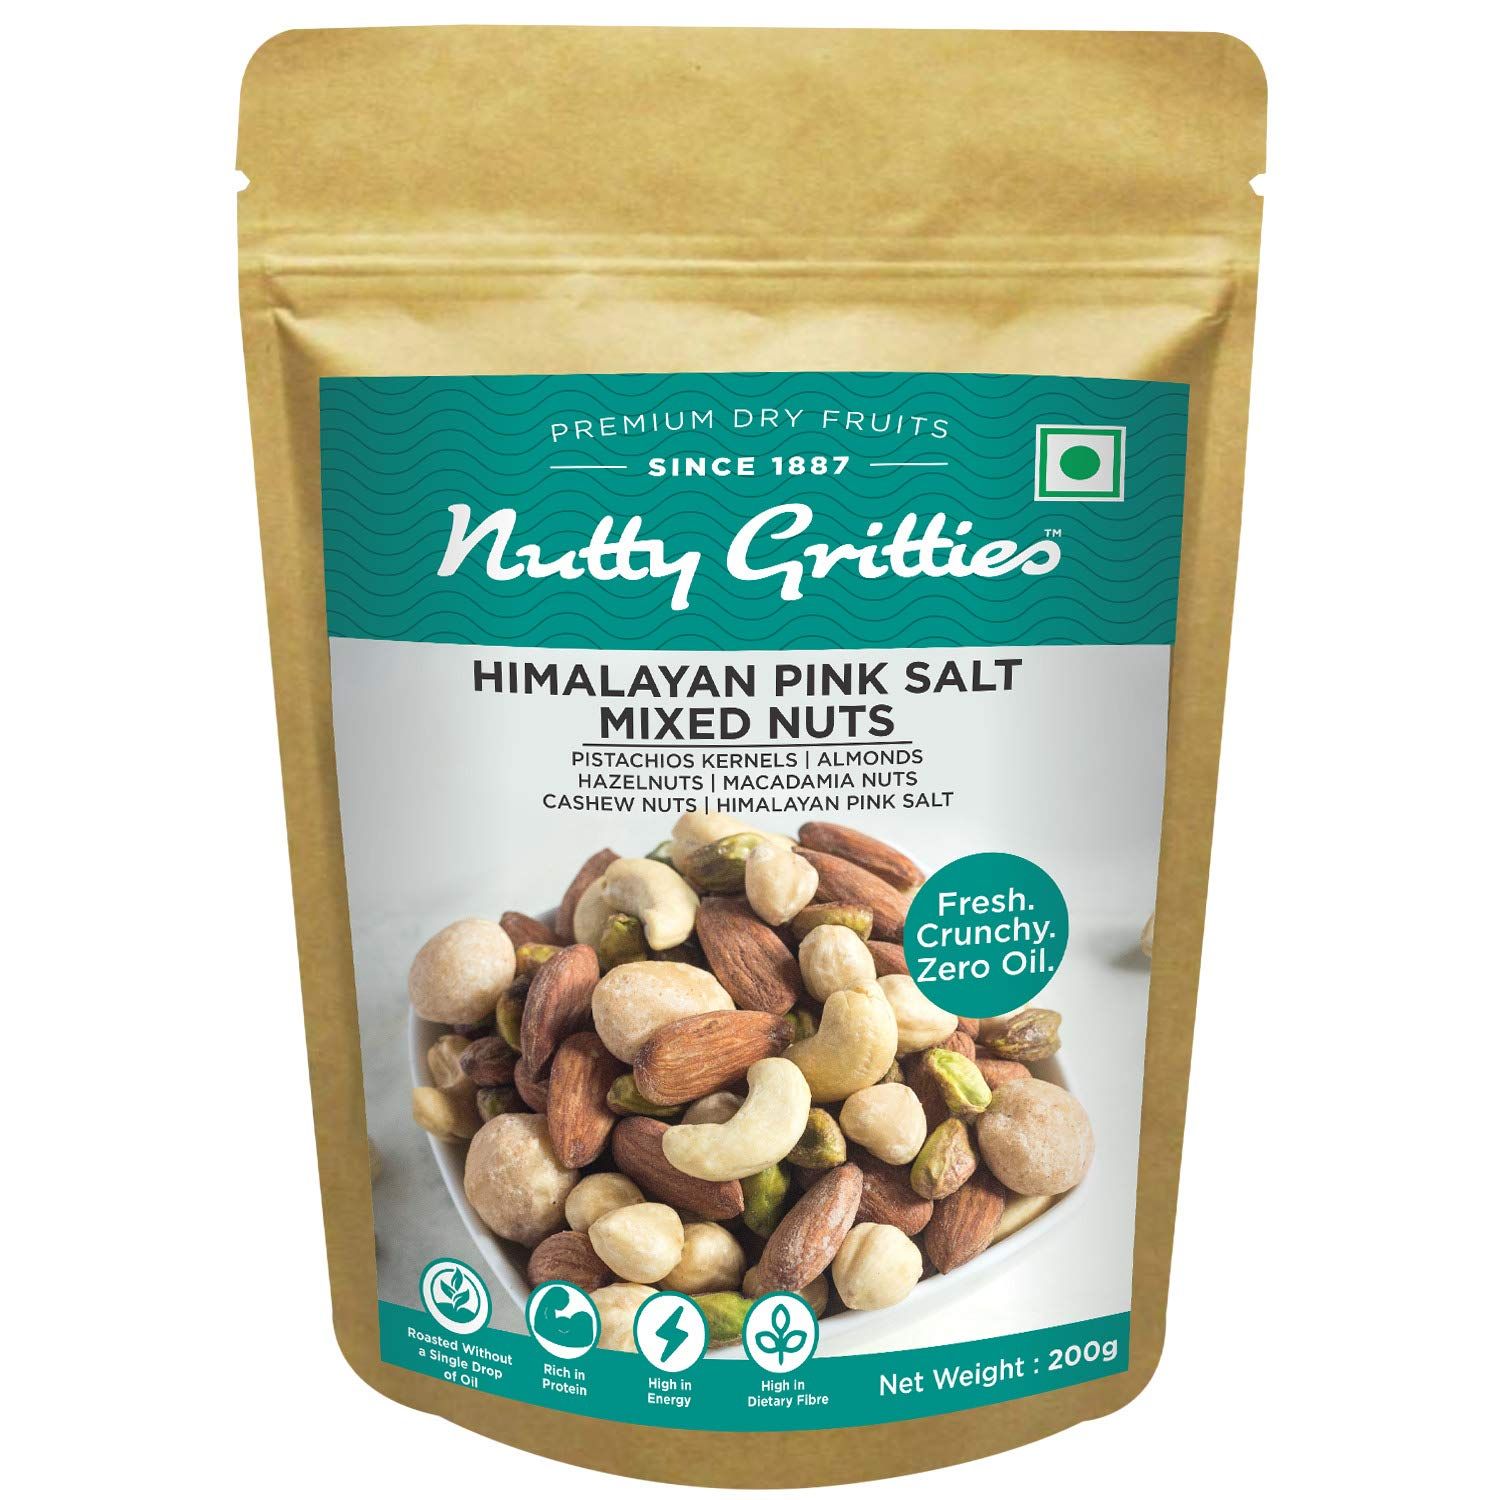 Nutty Gritties Himalayan Pink Salt Mixed Nuts Image